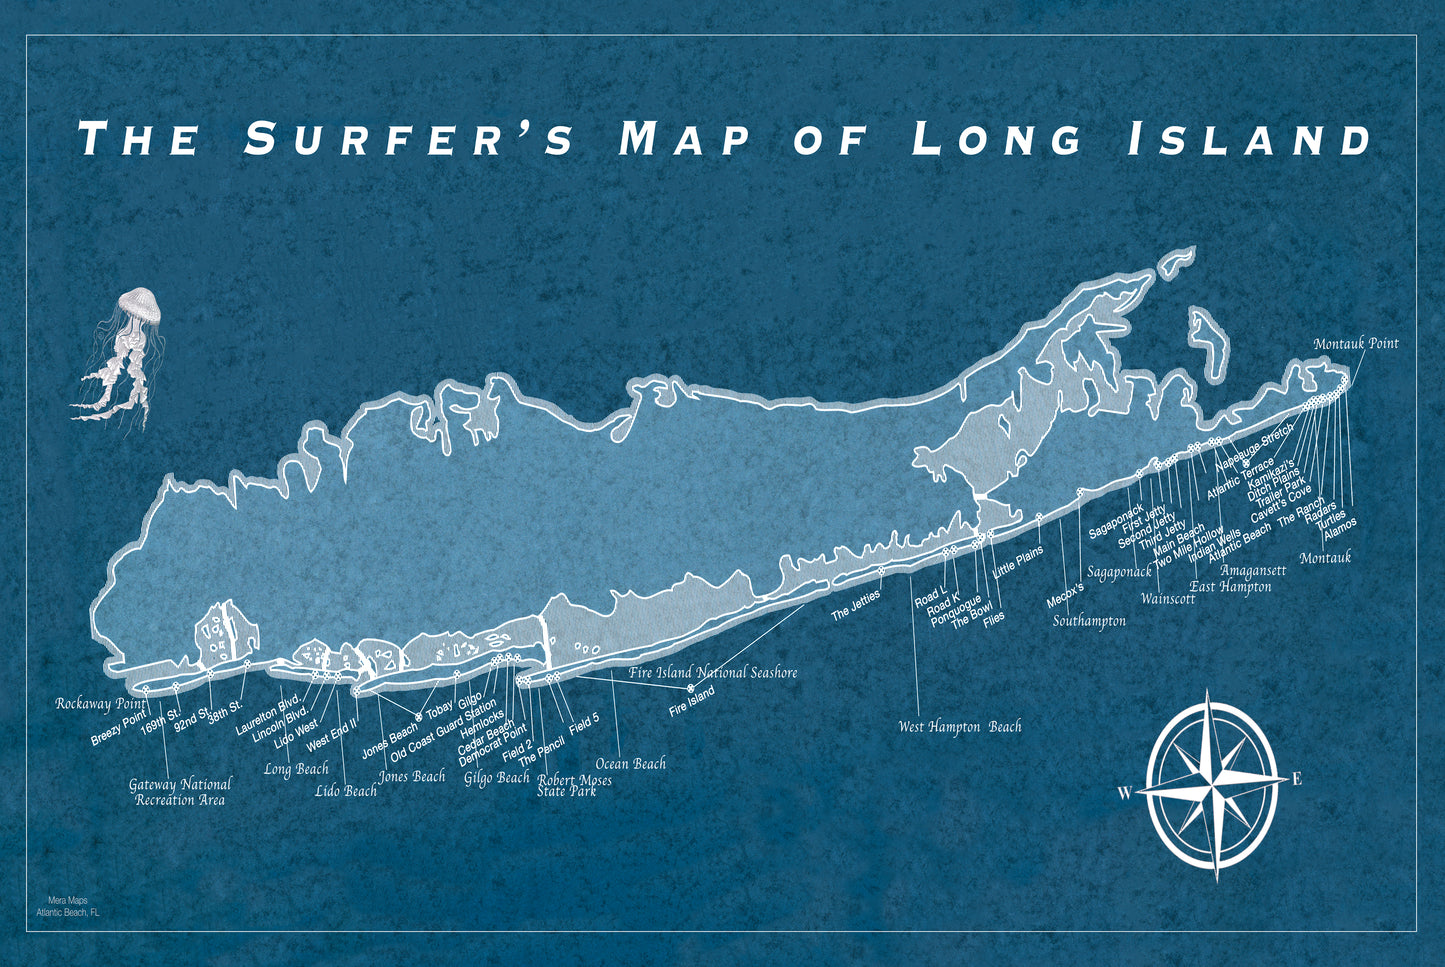 The Surfer's Map of Long Island